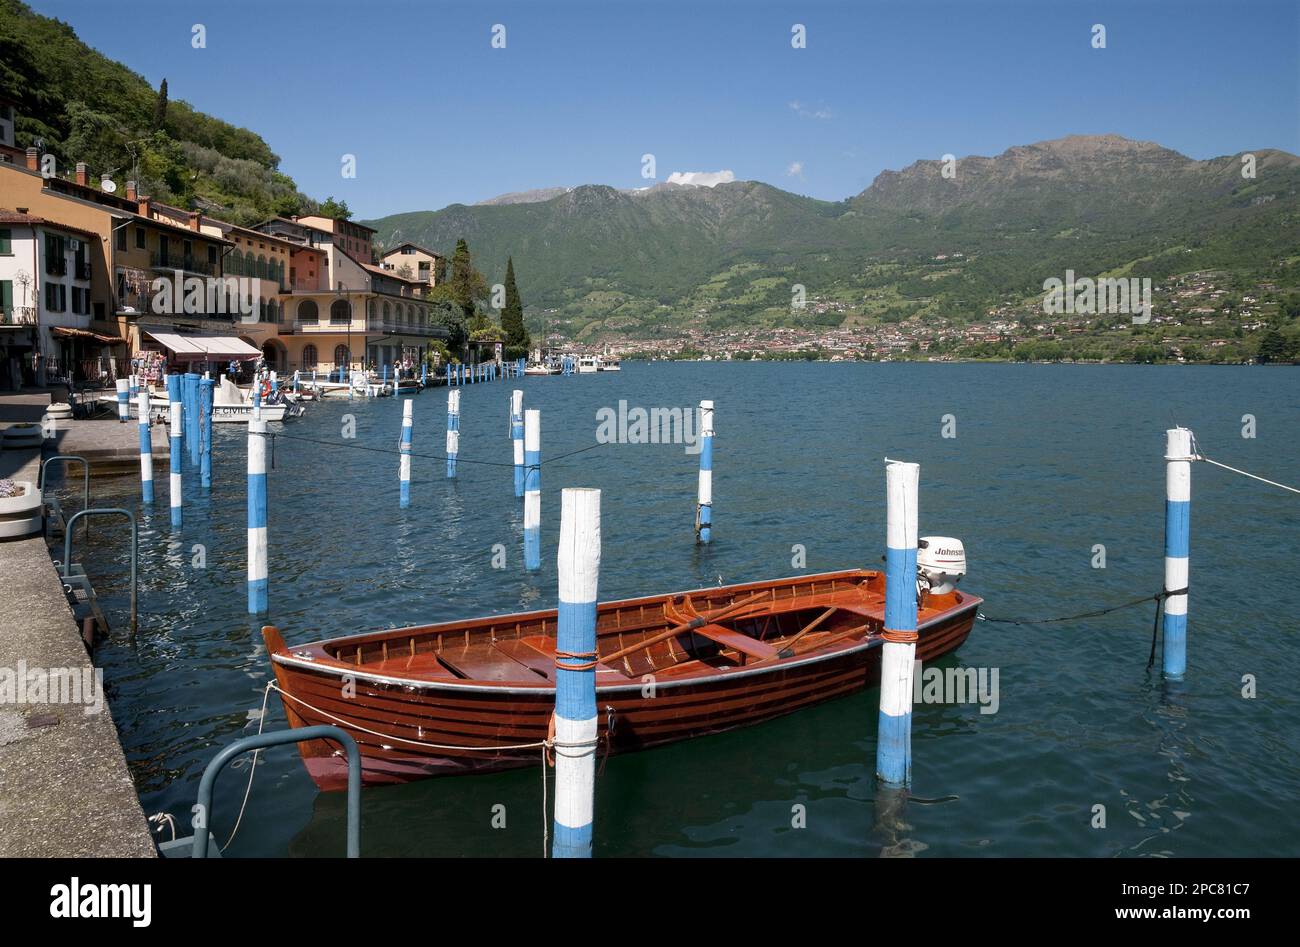 Boats in the harbour of the town on the lake island, Peschiera Maraglio, Monte Isola, Lago d'Iseo, Lombardy, Italy Stock Photo